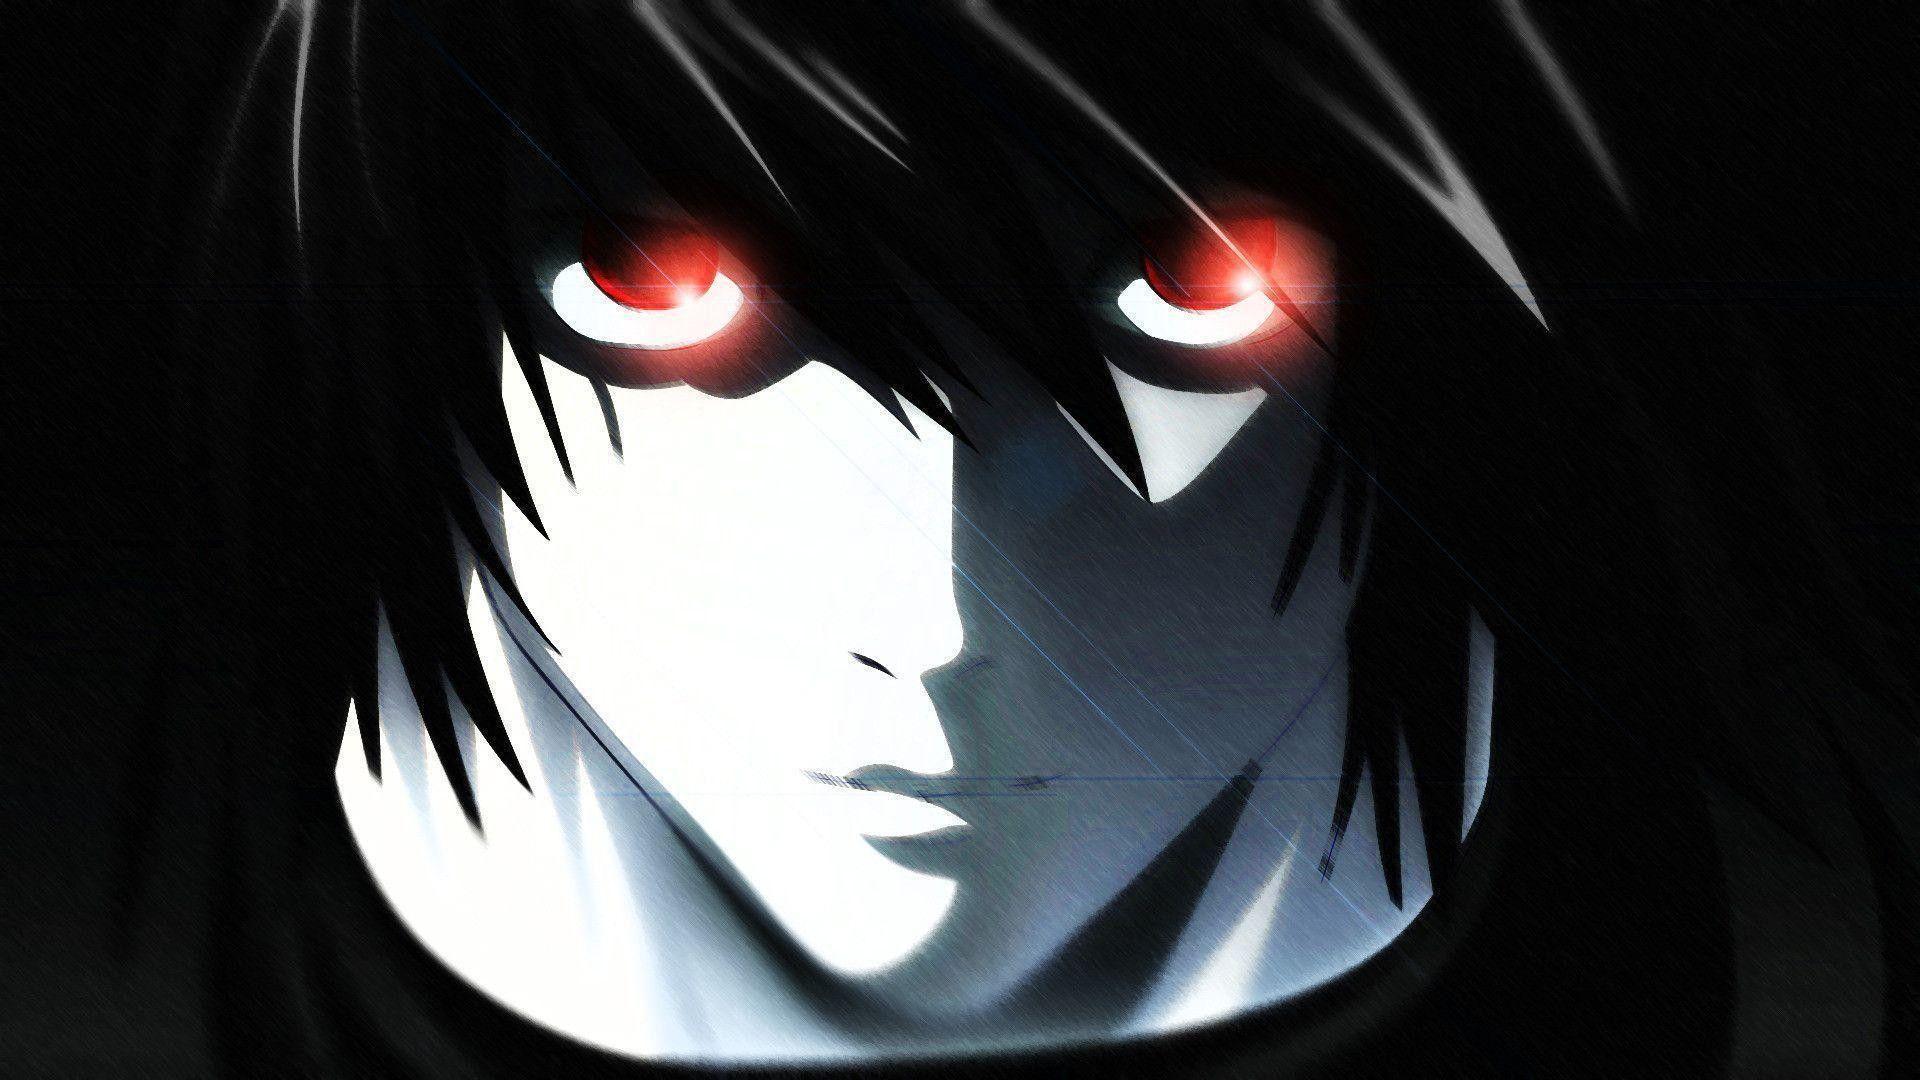 Death Note Ryuzaki Wallpaper - Download to your mobile from PHONEKY